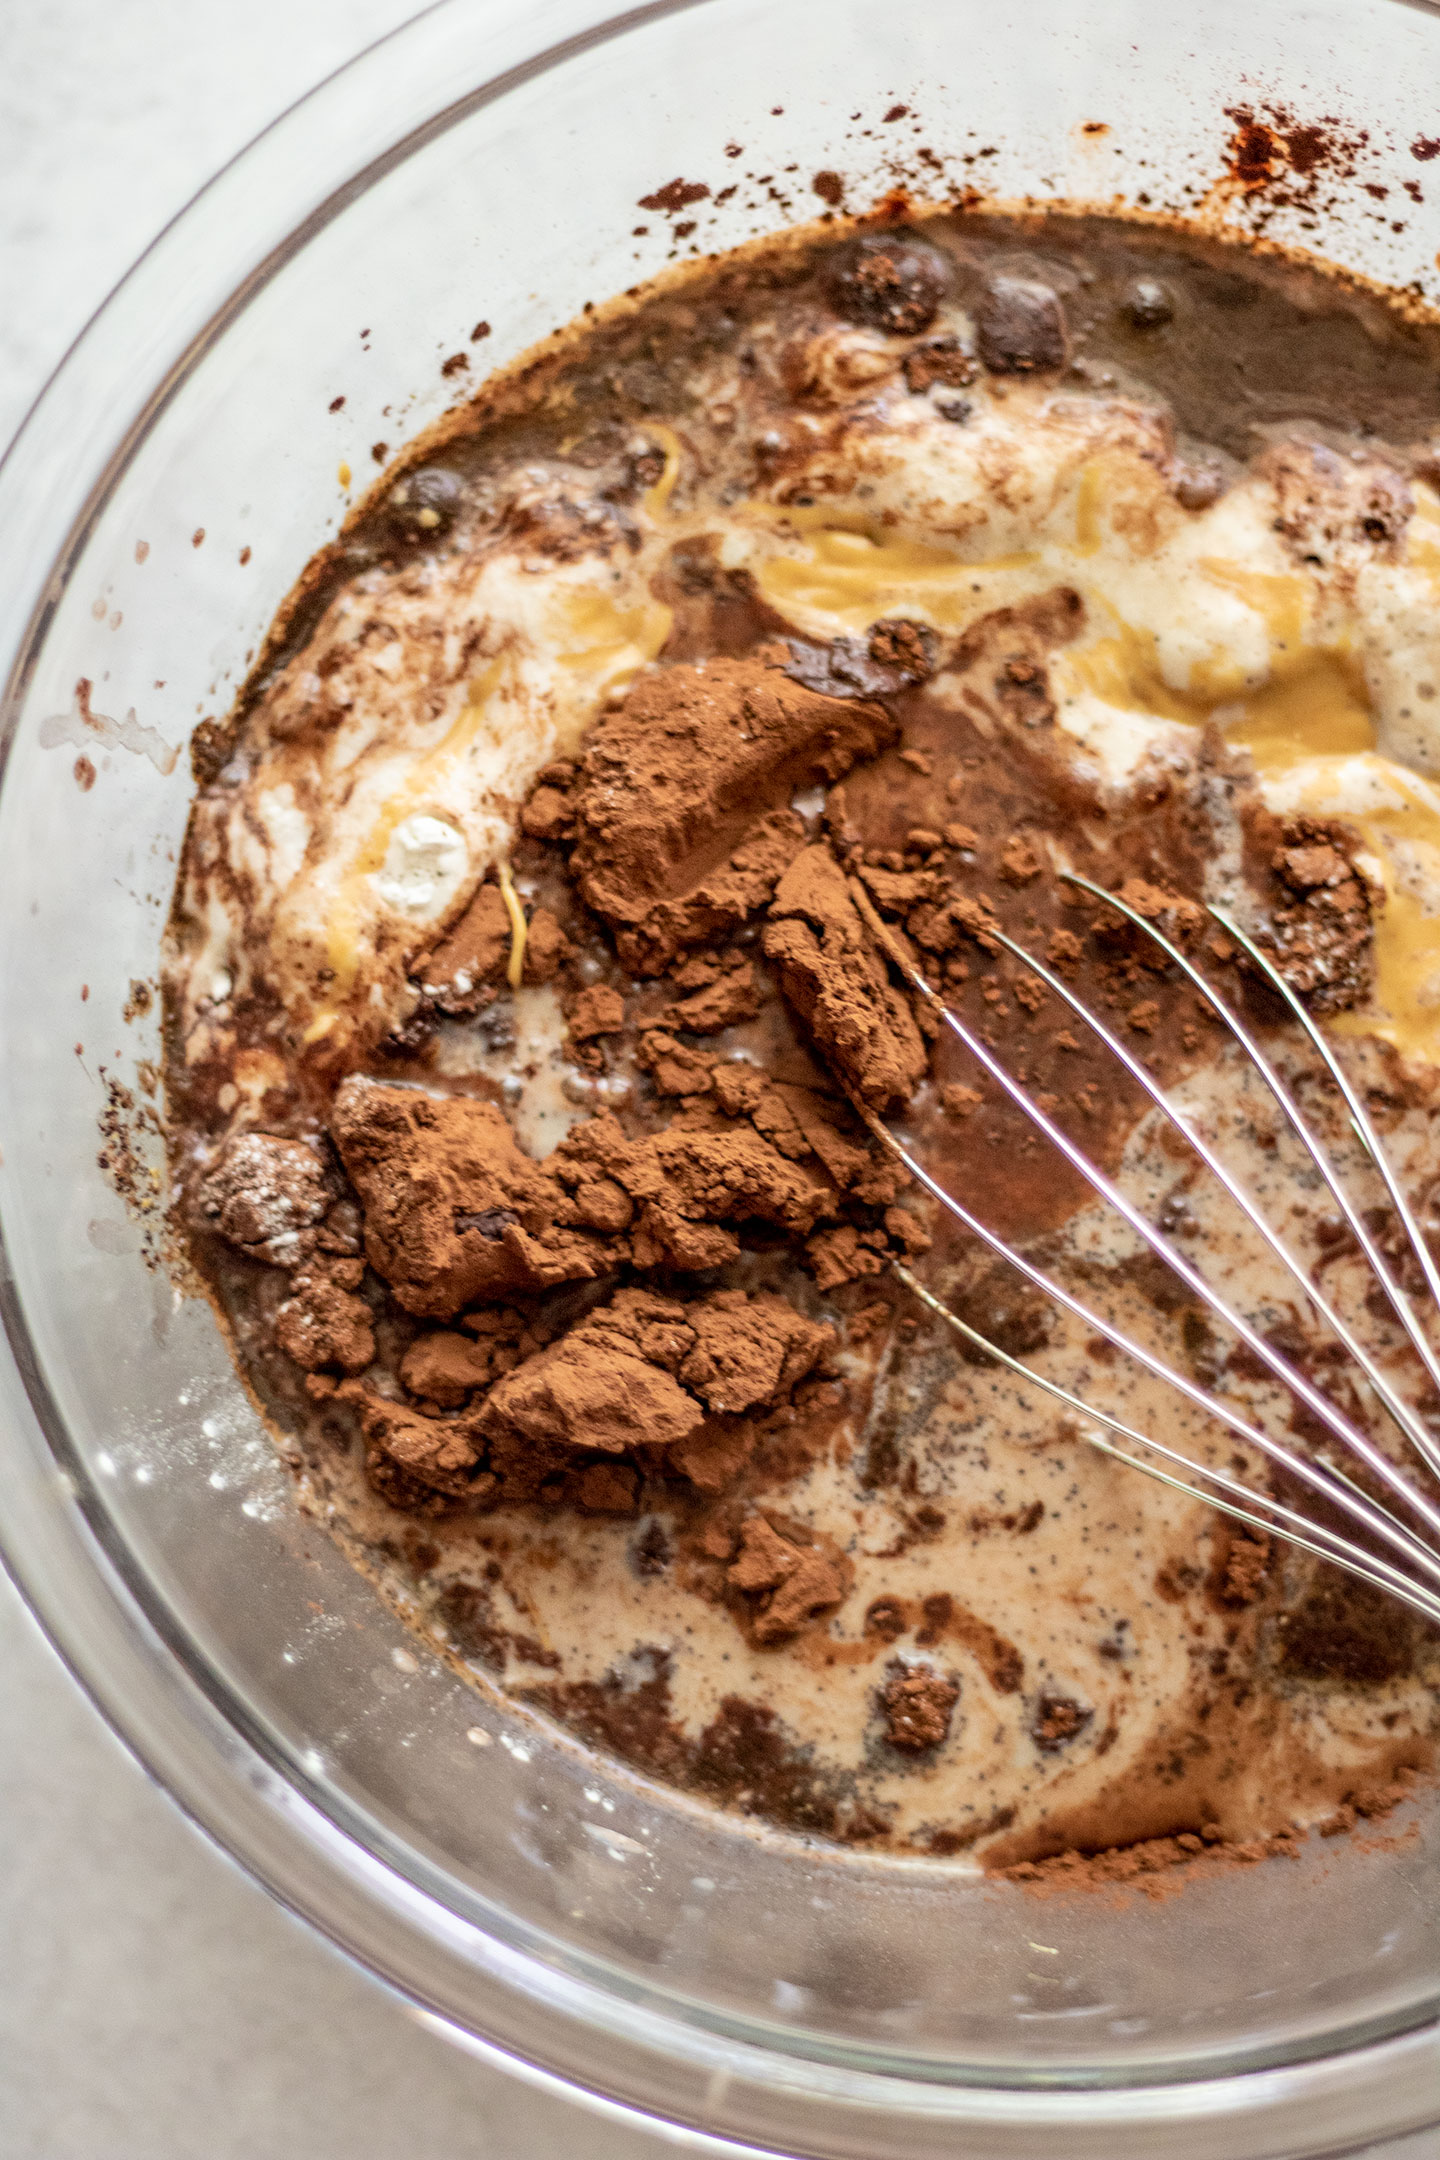 Mixing the chocolate batter together in a glass bowl with a metal whisk.